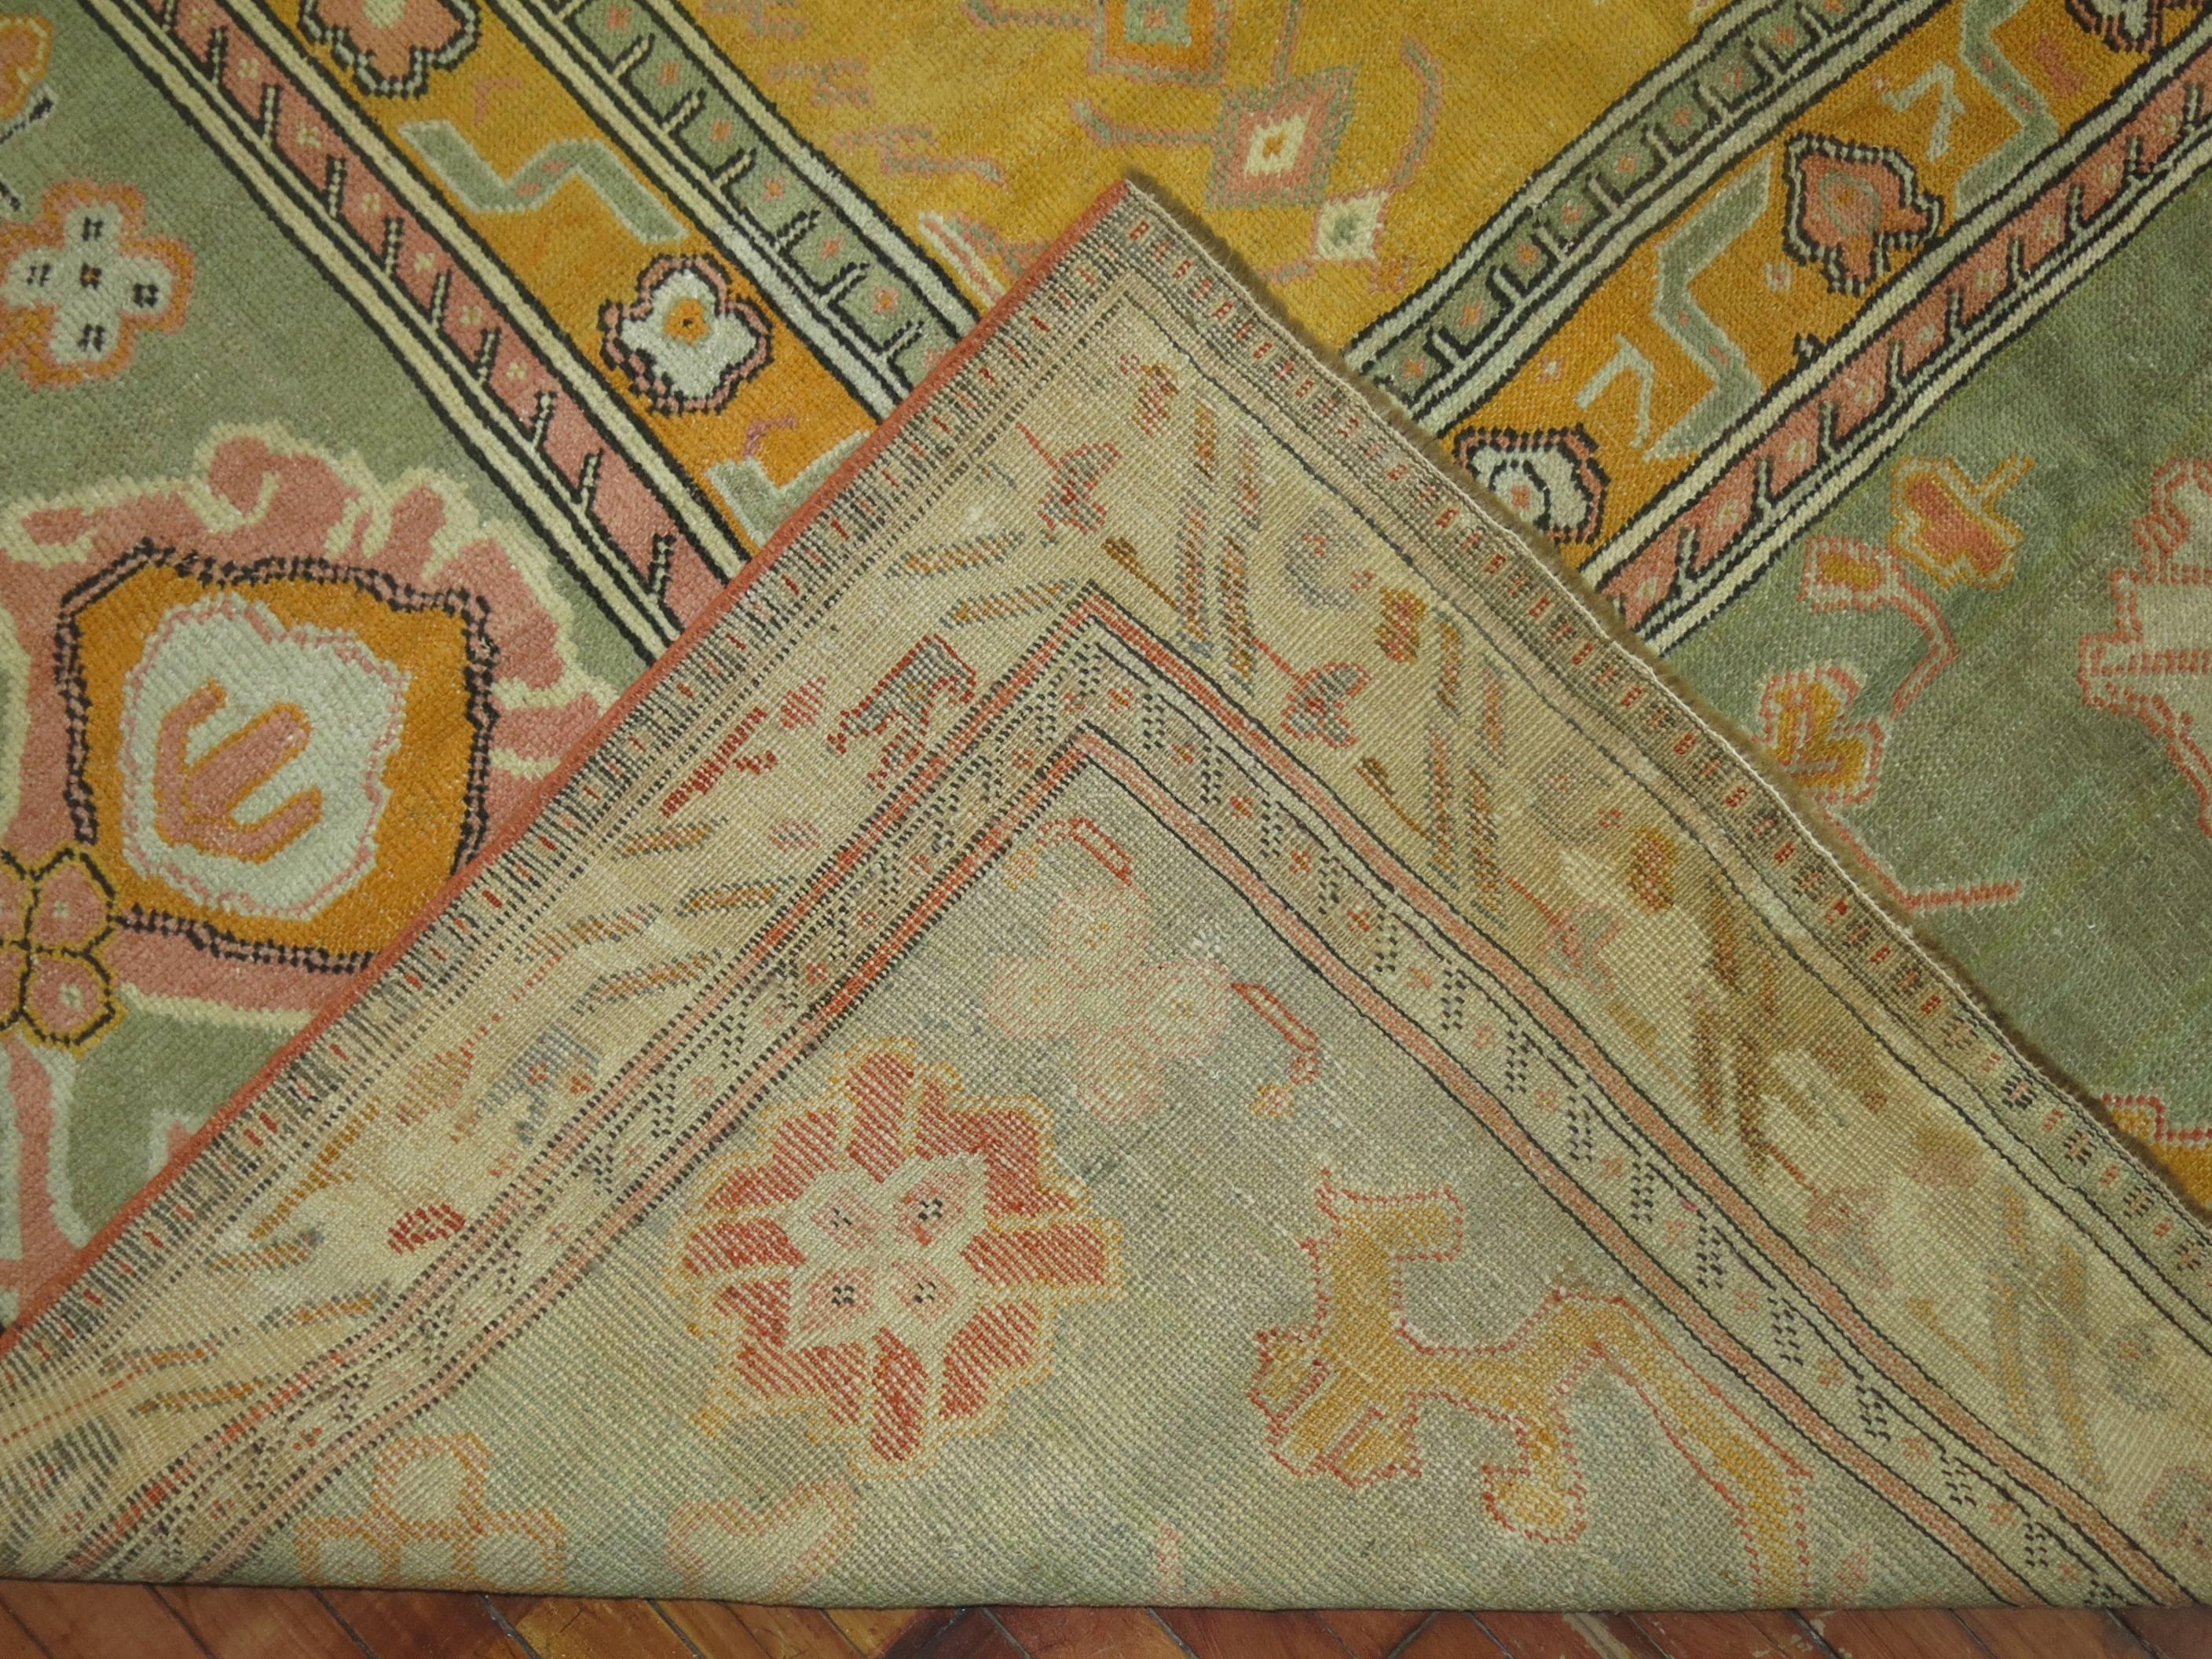 An early 20th century Turkish Ghiordes carpet with an all-over sunny yellow motif and green border.

Measures: 12'6